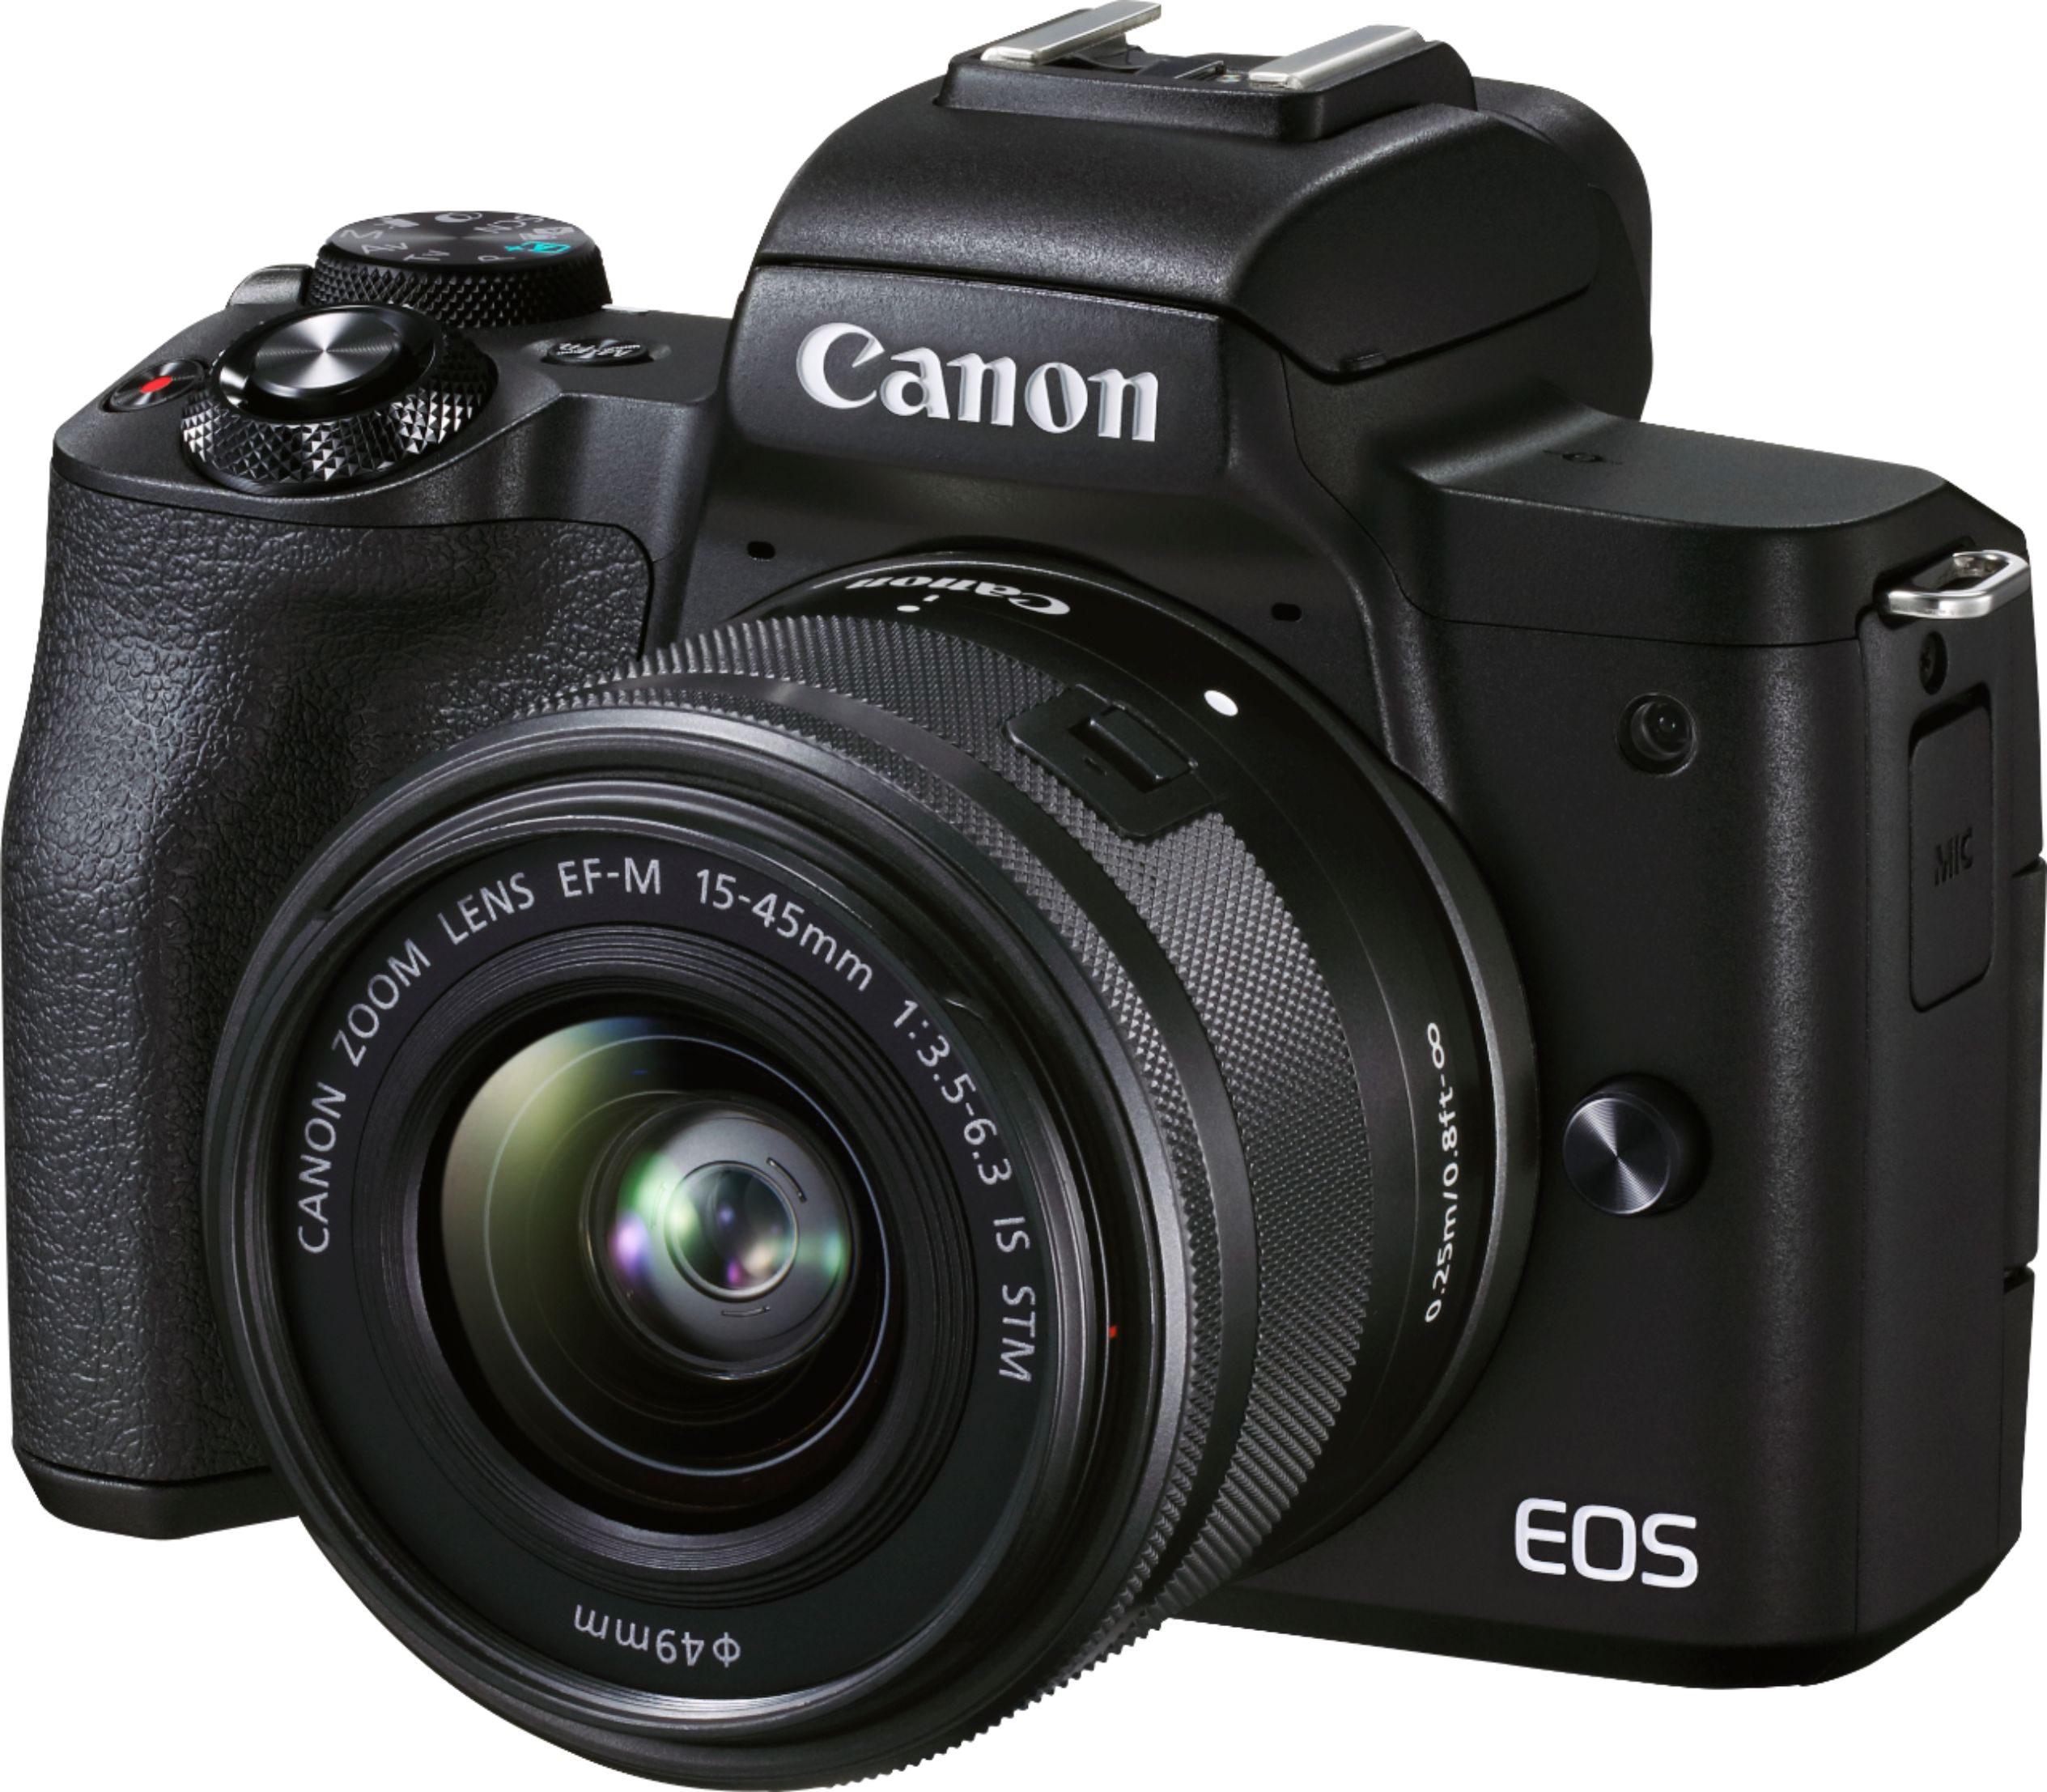 Canon M50 Mark II Mirrorless Camera with EF-M 15-45mm f/3.5-6.3 IS STM Lens Black 4728C006 Best Buy